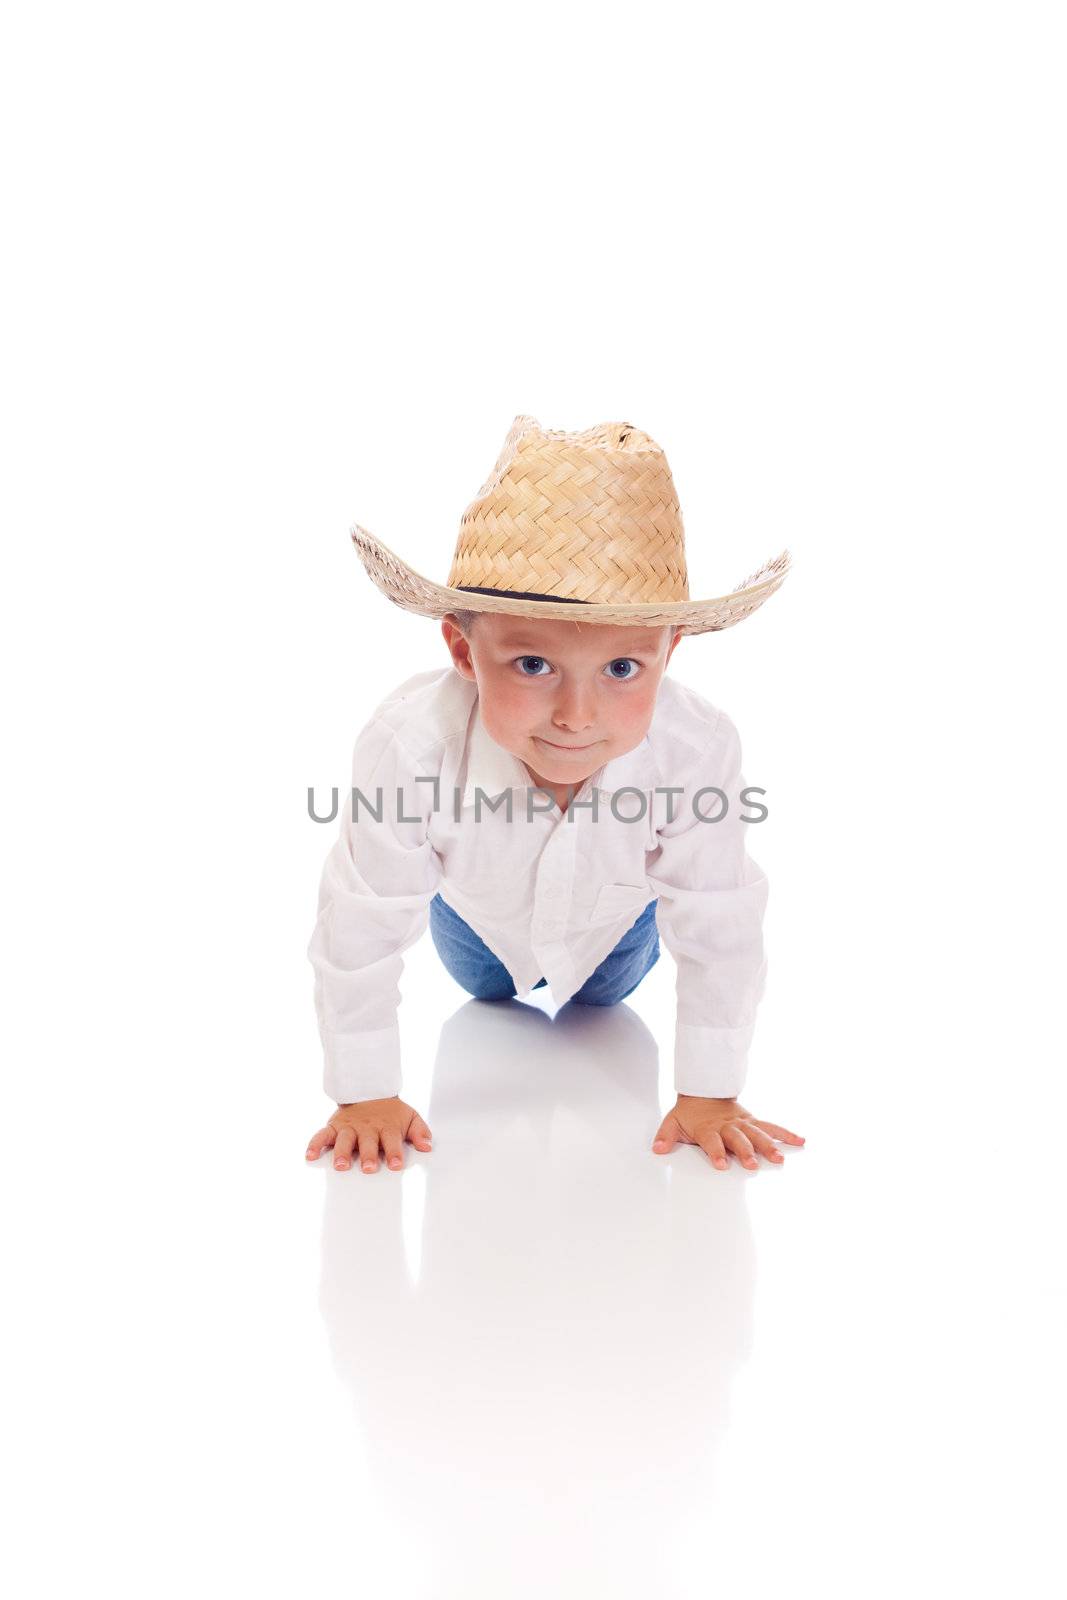 Little boy with a hat doing push-ups